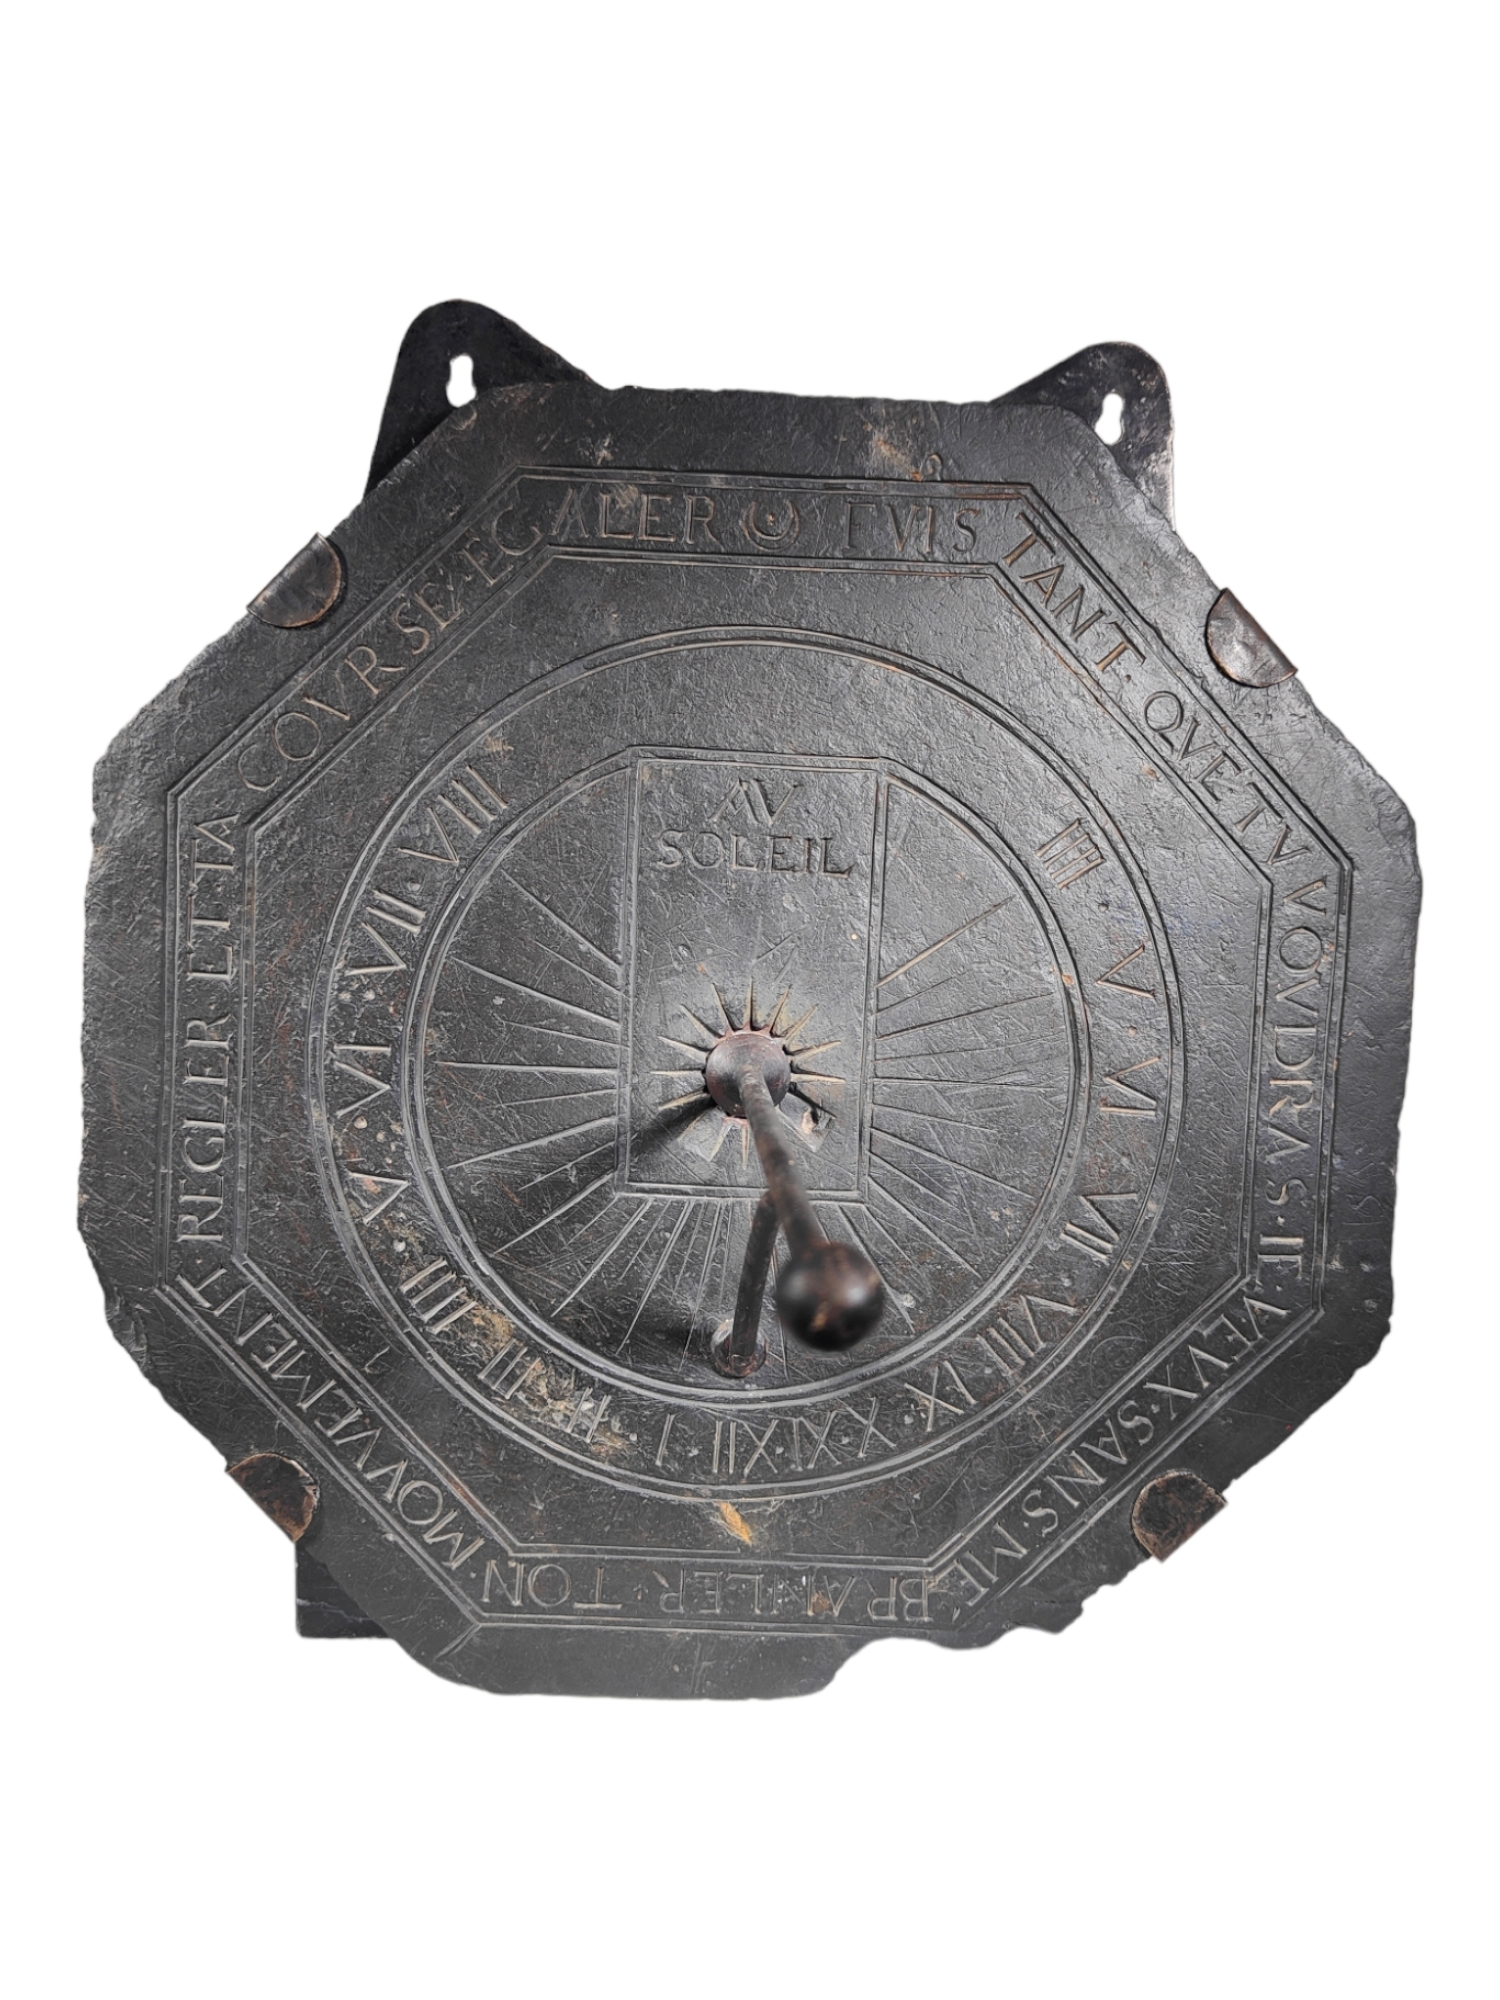 A FINE LARGE 17 TH CENTURY FRENCH SLATE OCTAGONAL SUNDIAL